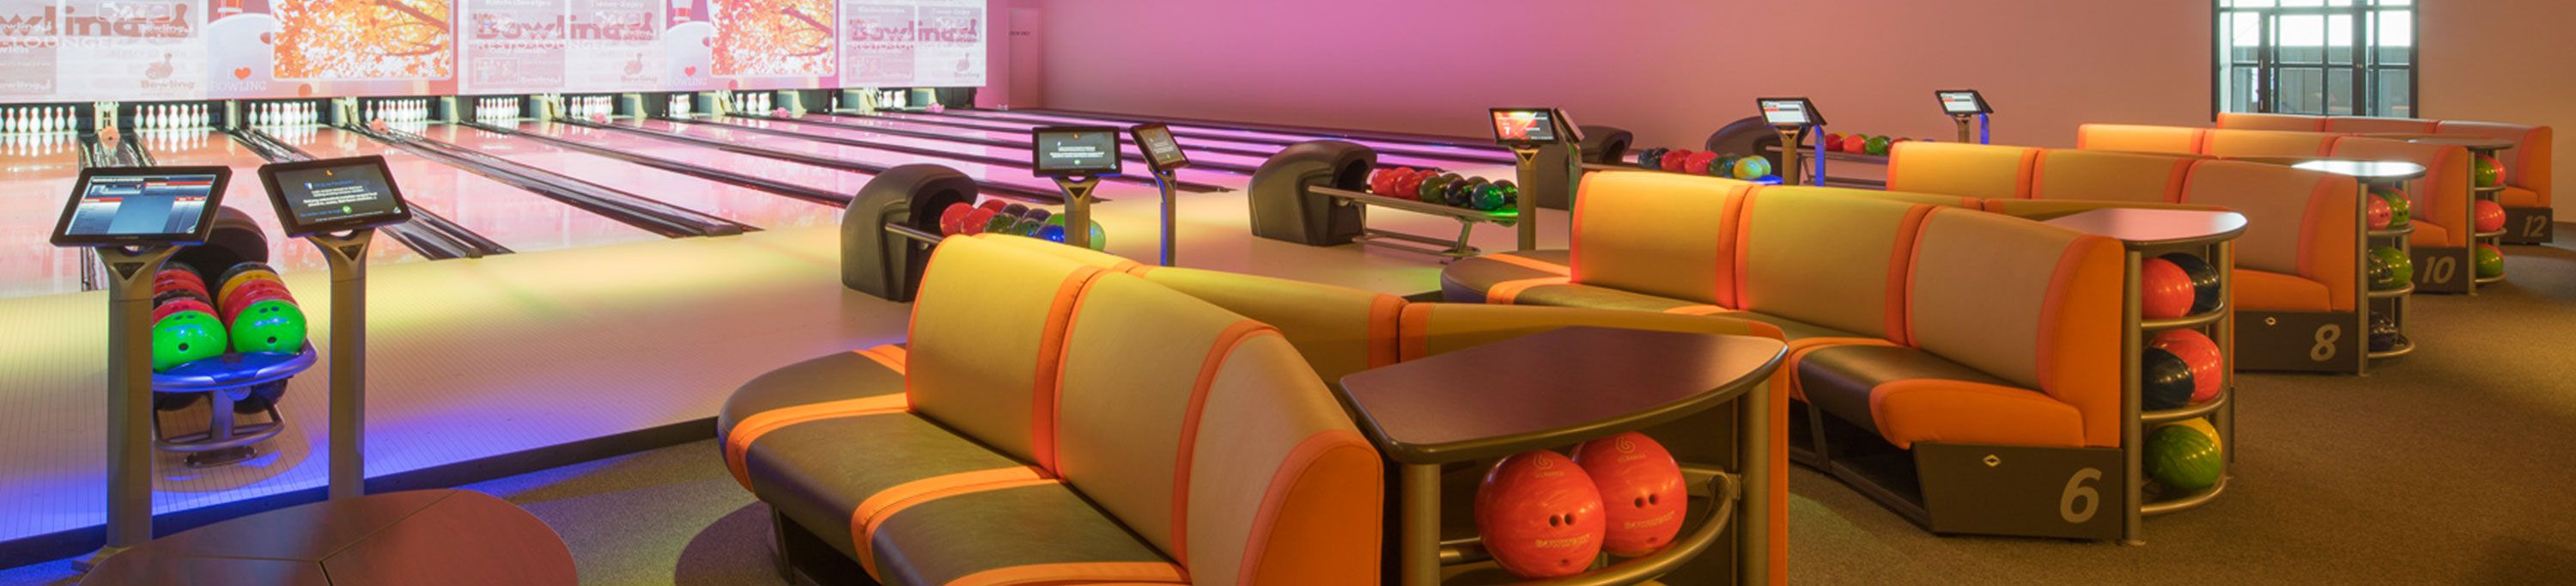 Harmony Furniture Qubicaamf Bowling Equipement Center 01